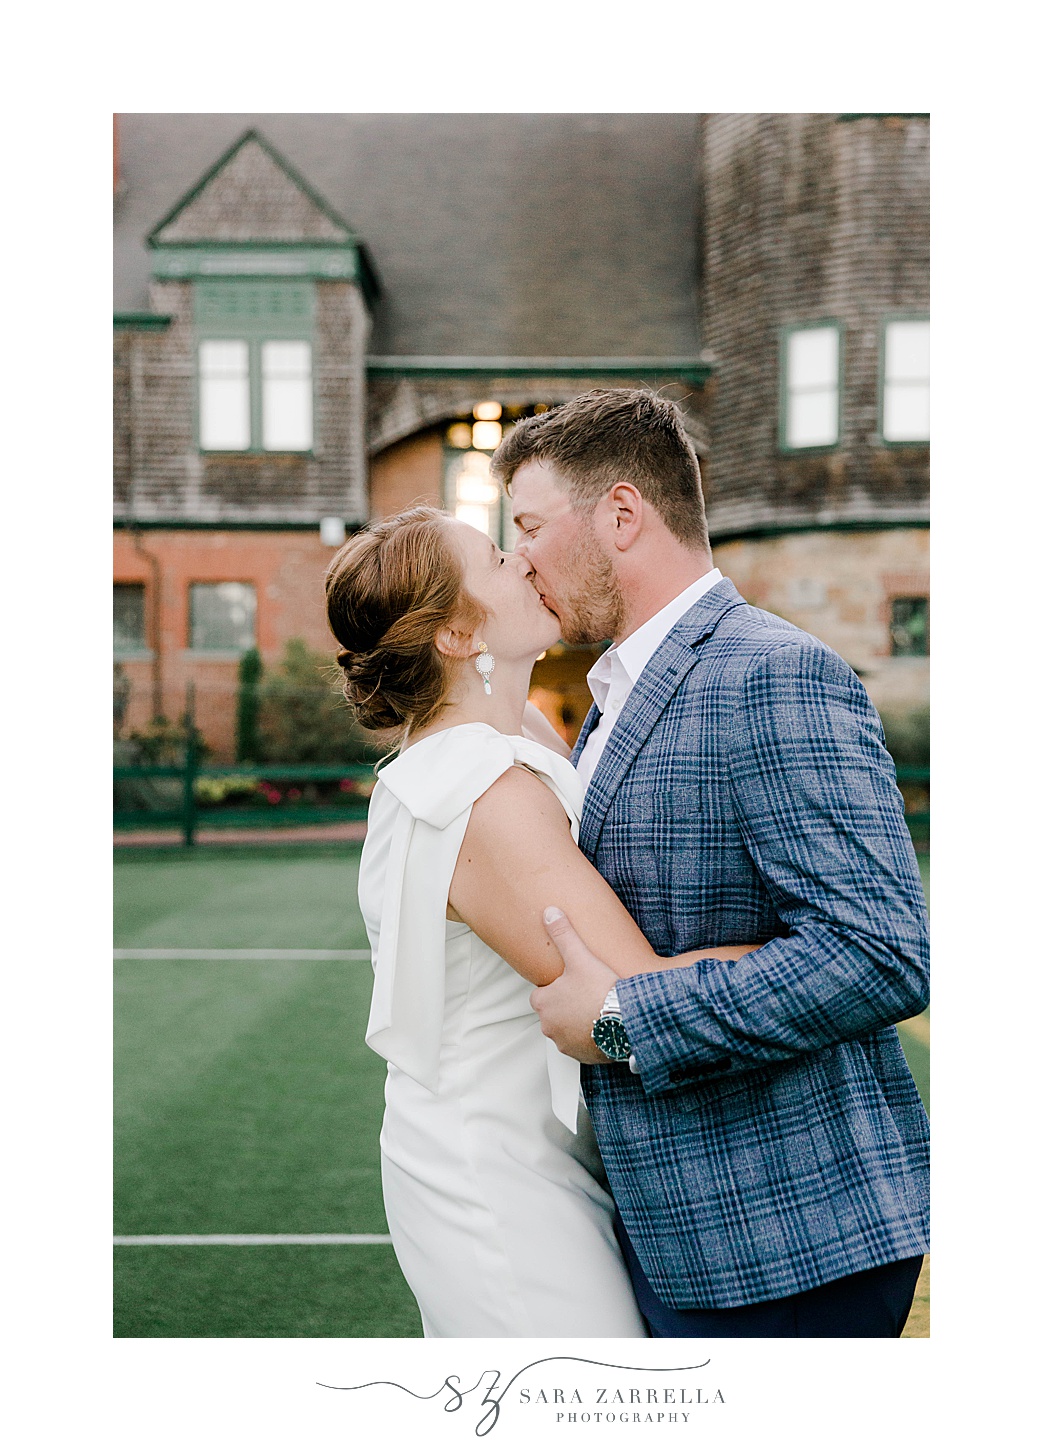 Rhode Island bride and groom kiss on lawn at The International Tennis Hall of Fame